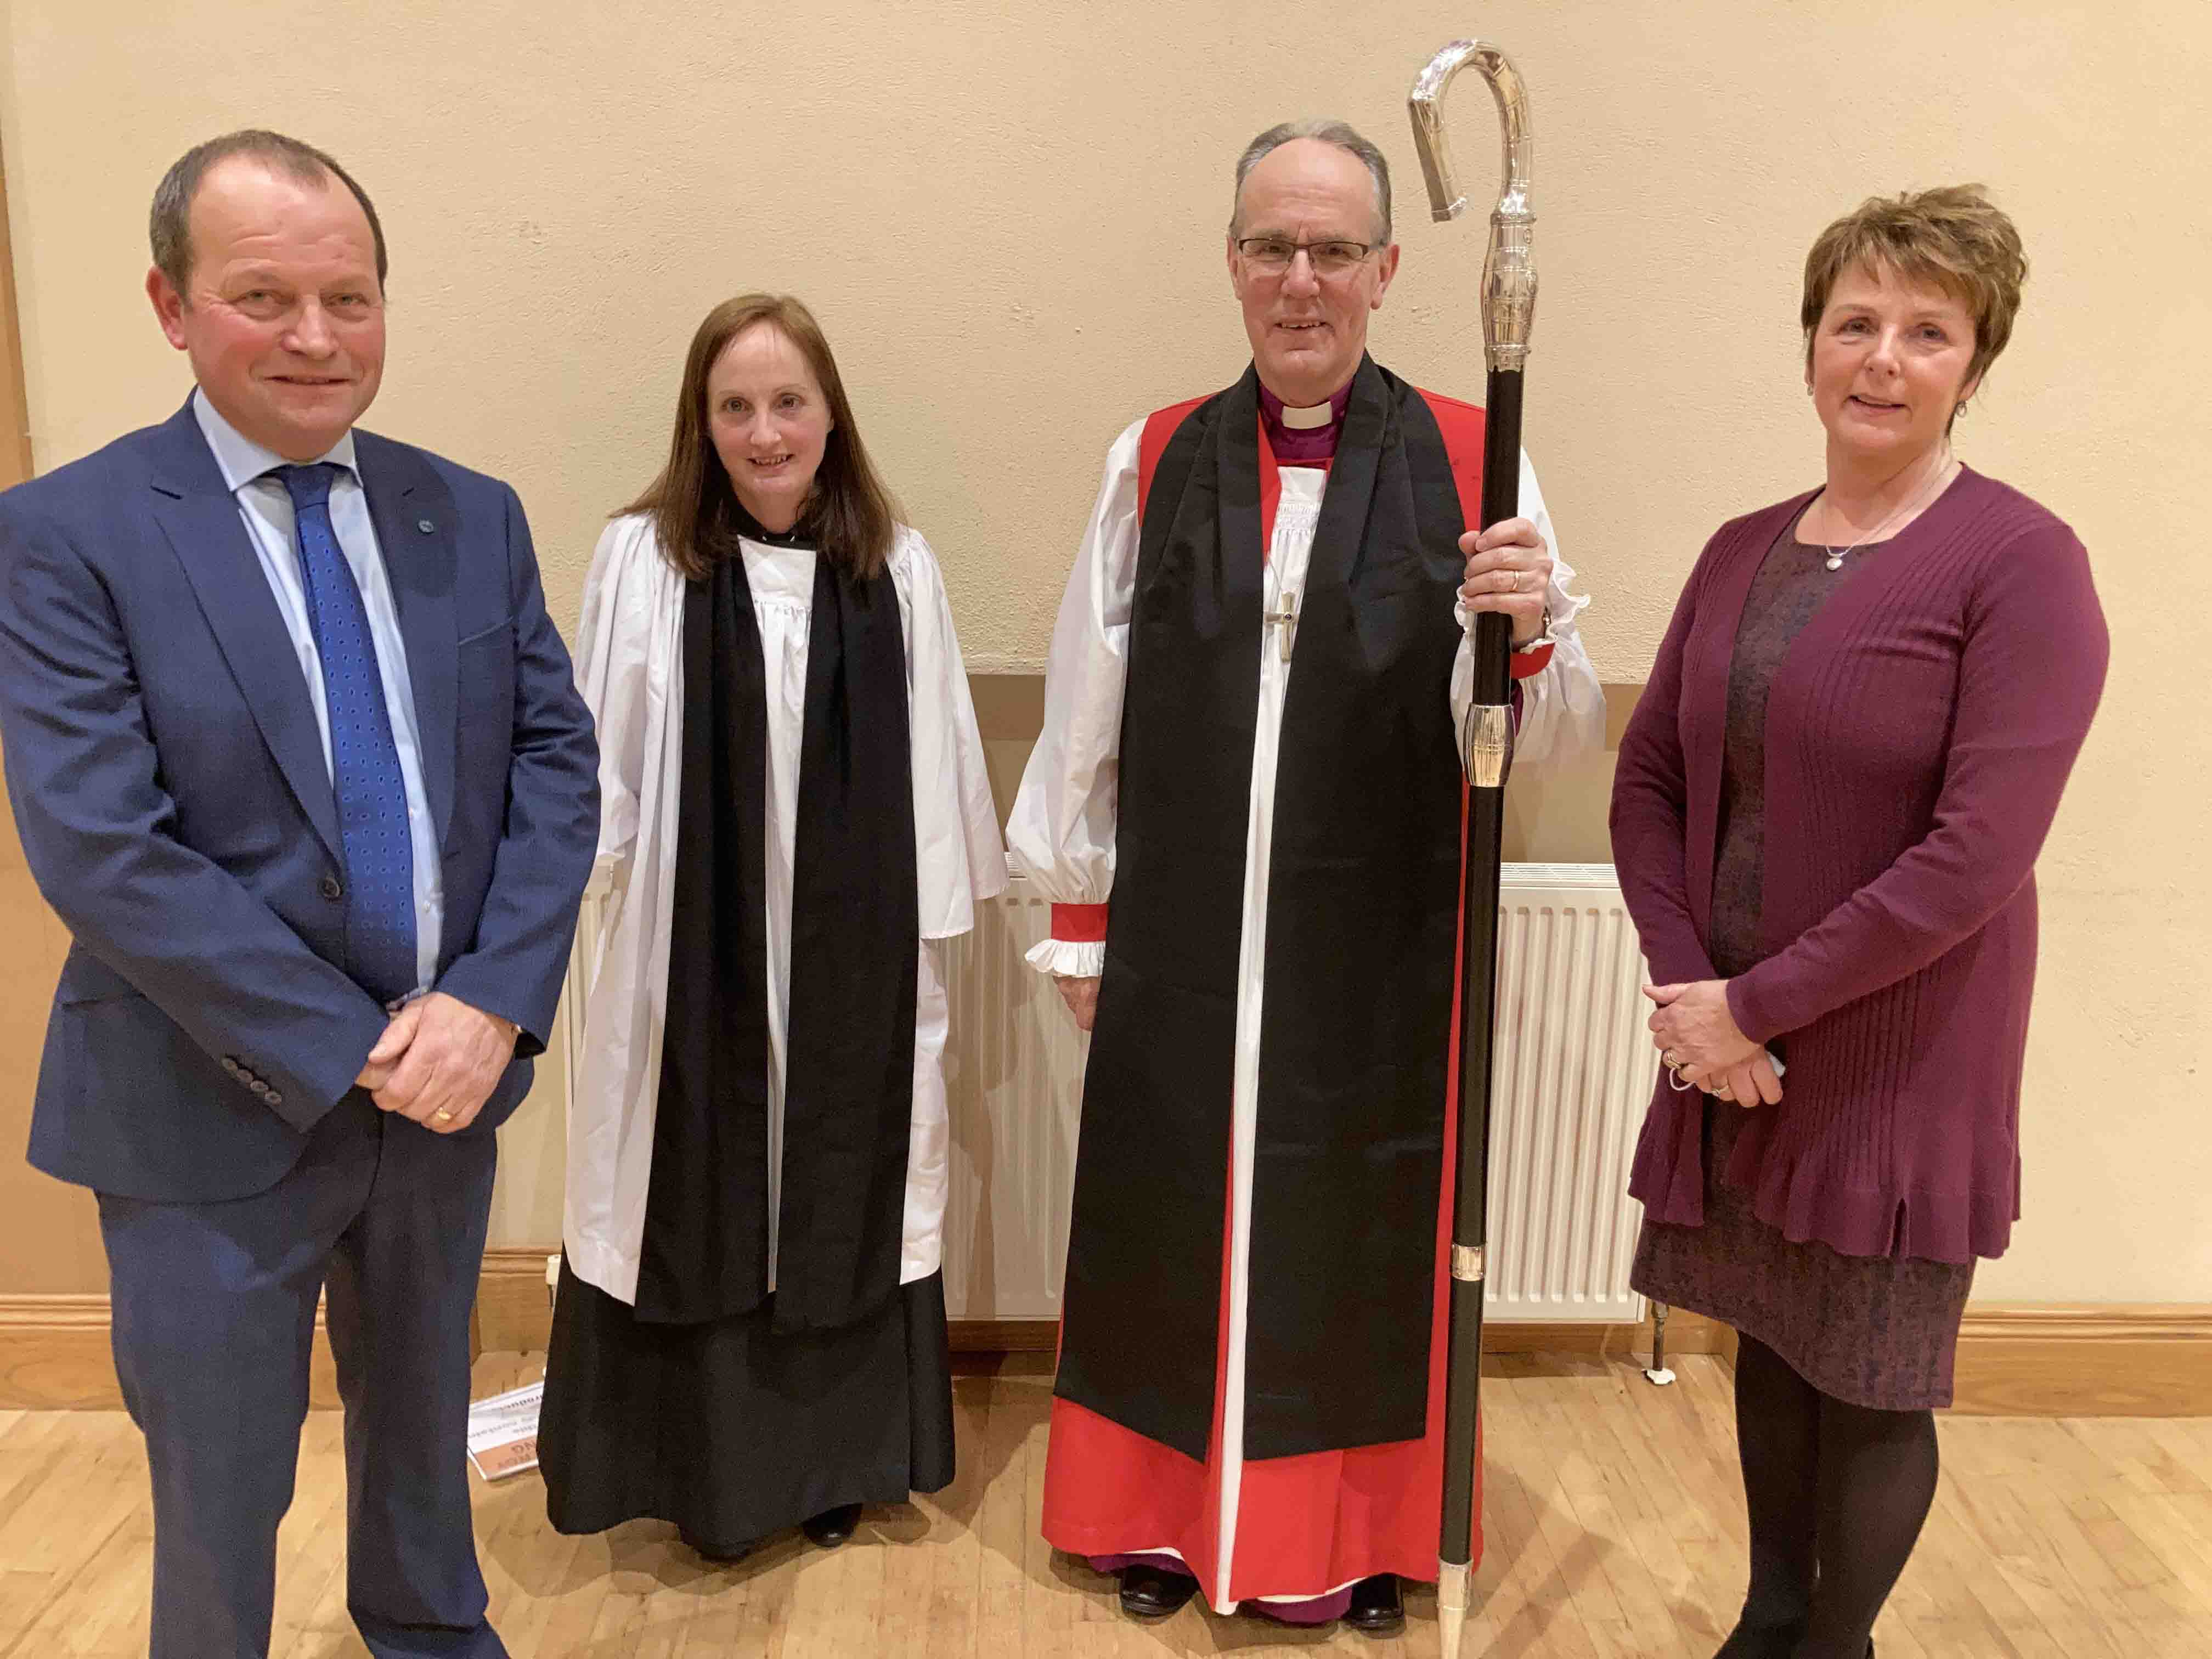 The Revd Lindsey Farrell with the Bishop of Clogher, the Right Revd Dr Ian Ellis, and churchwardens.